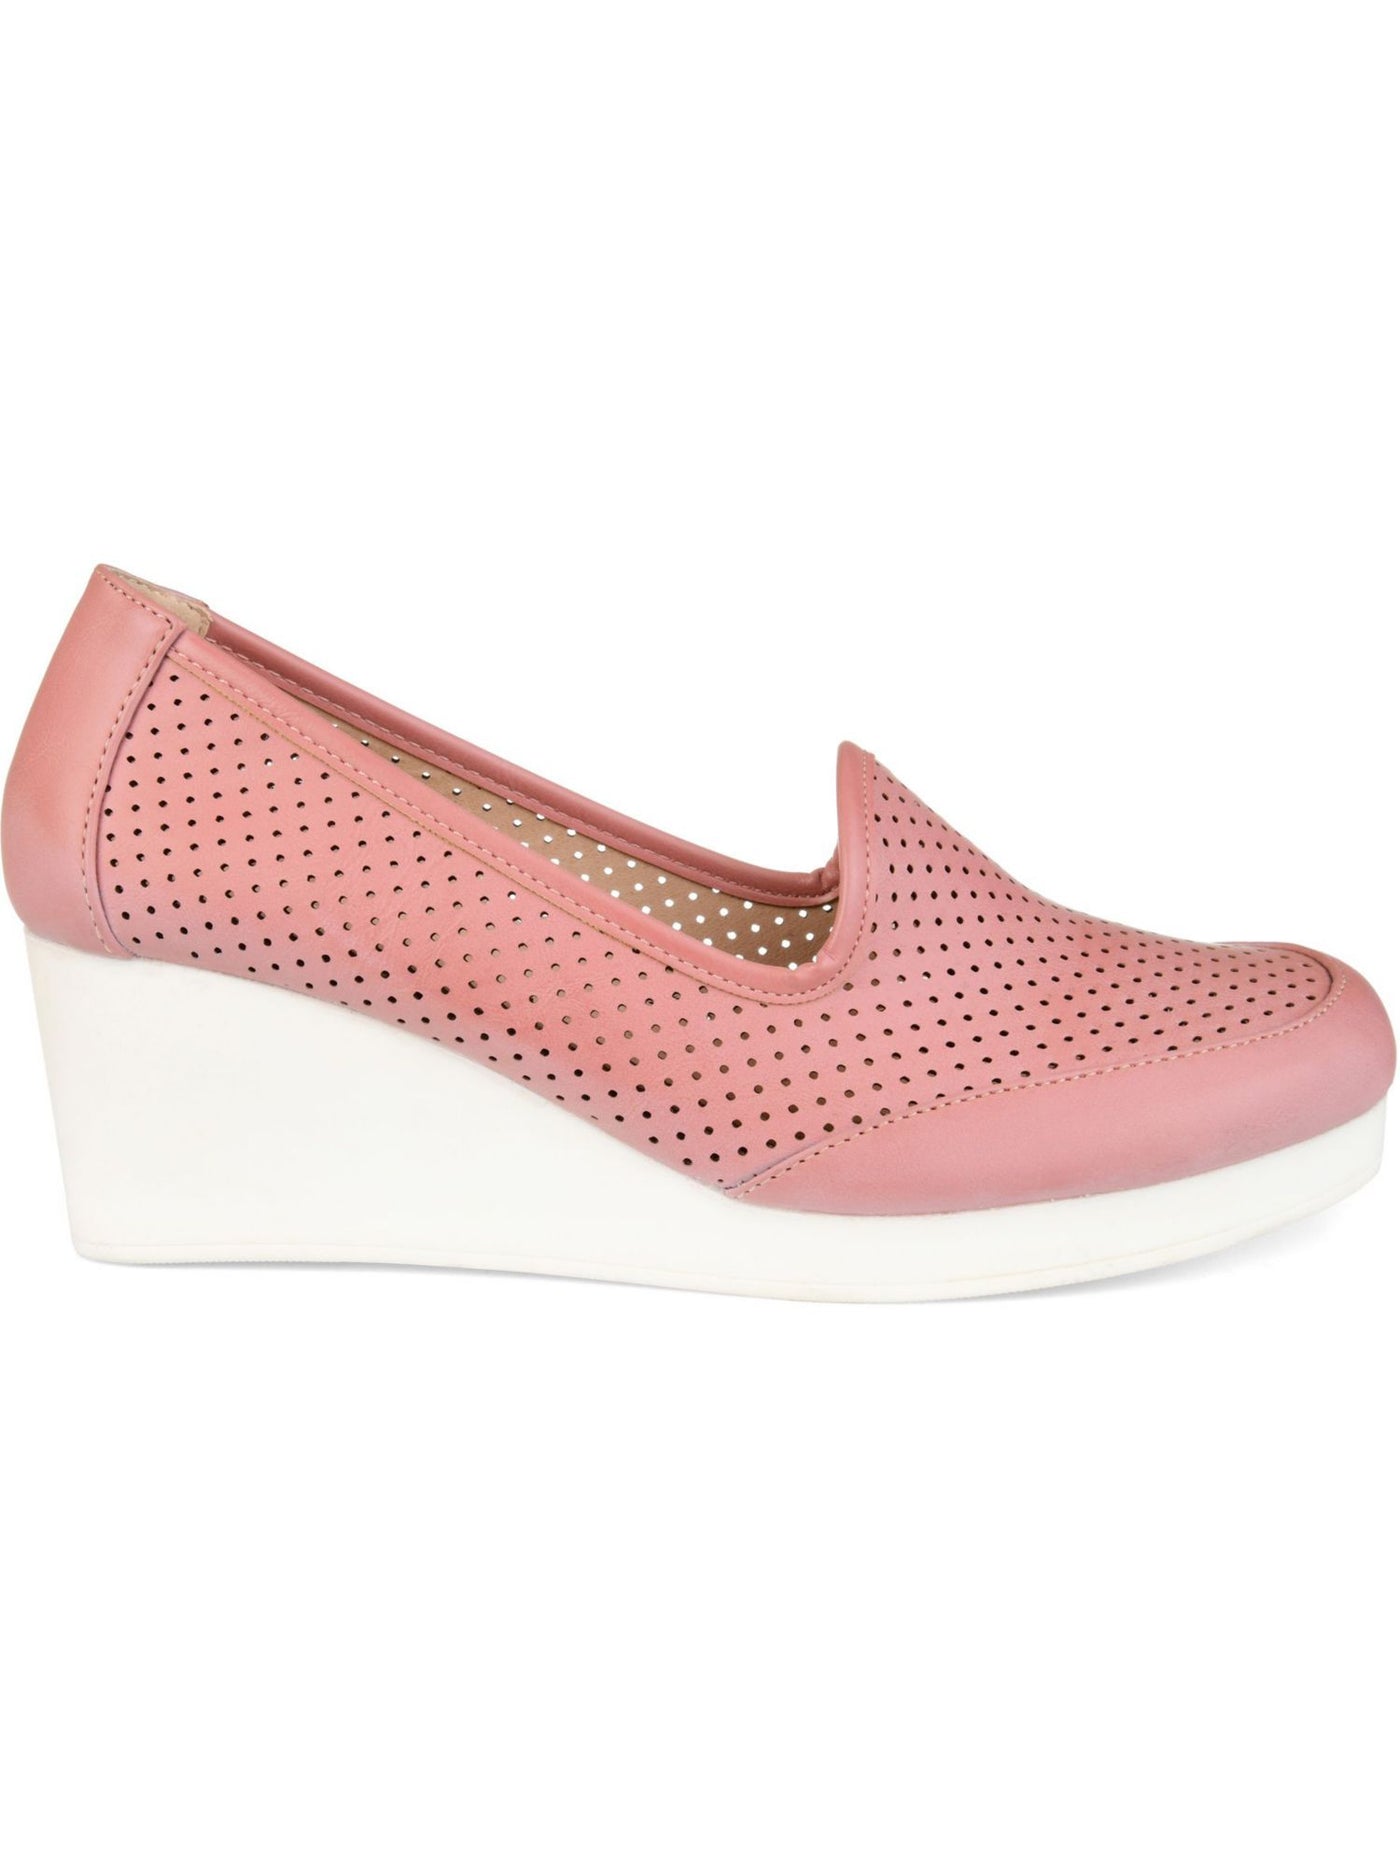 JOURNEE COLLECTION Womens Pink Perforated Cushioned Round Toe Wedge Slip On Heels Shoes 8.5